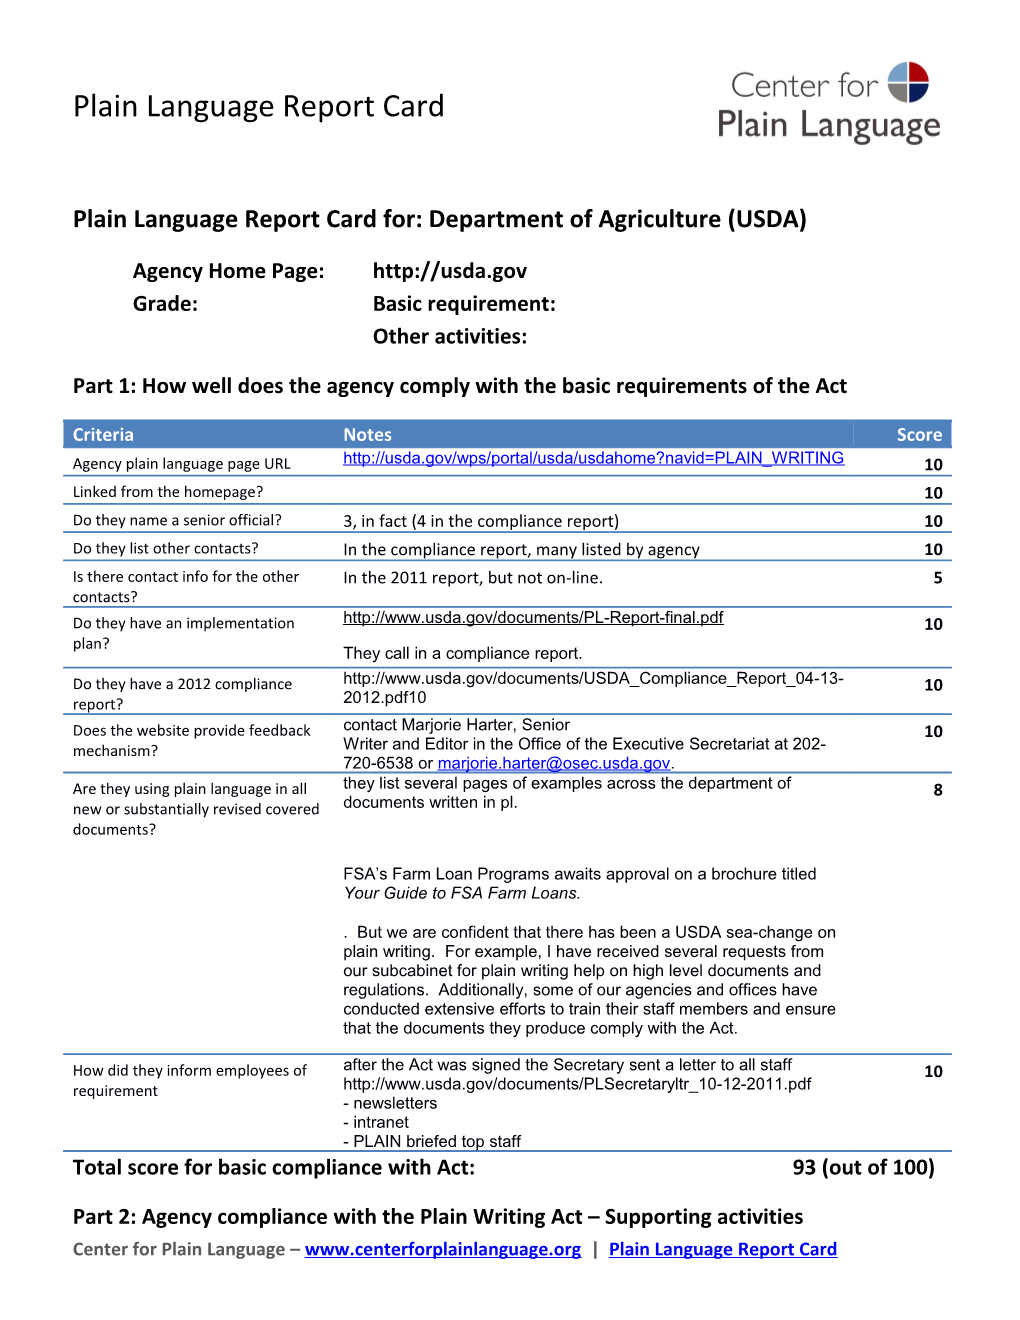 Plain Language Report Card For: Department of Agriculture (USDA)